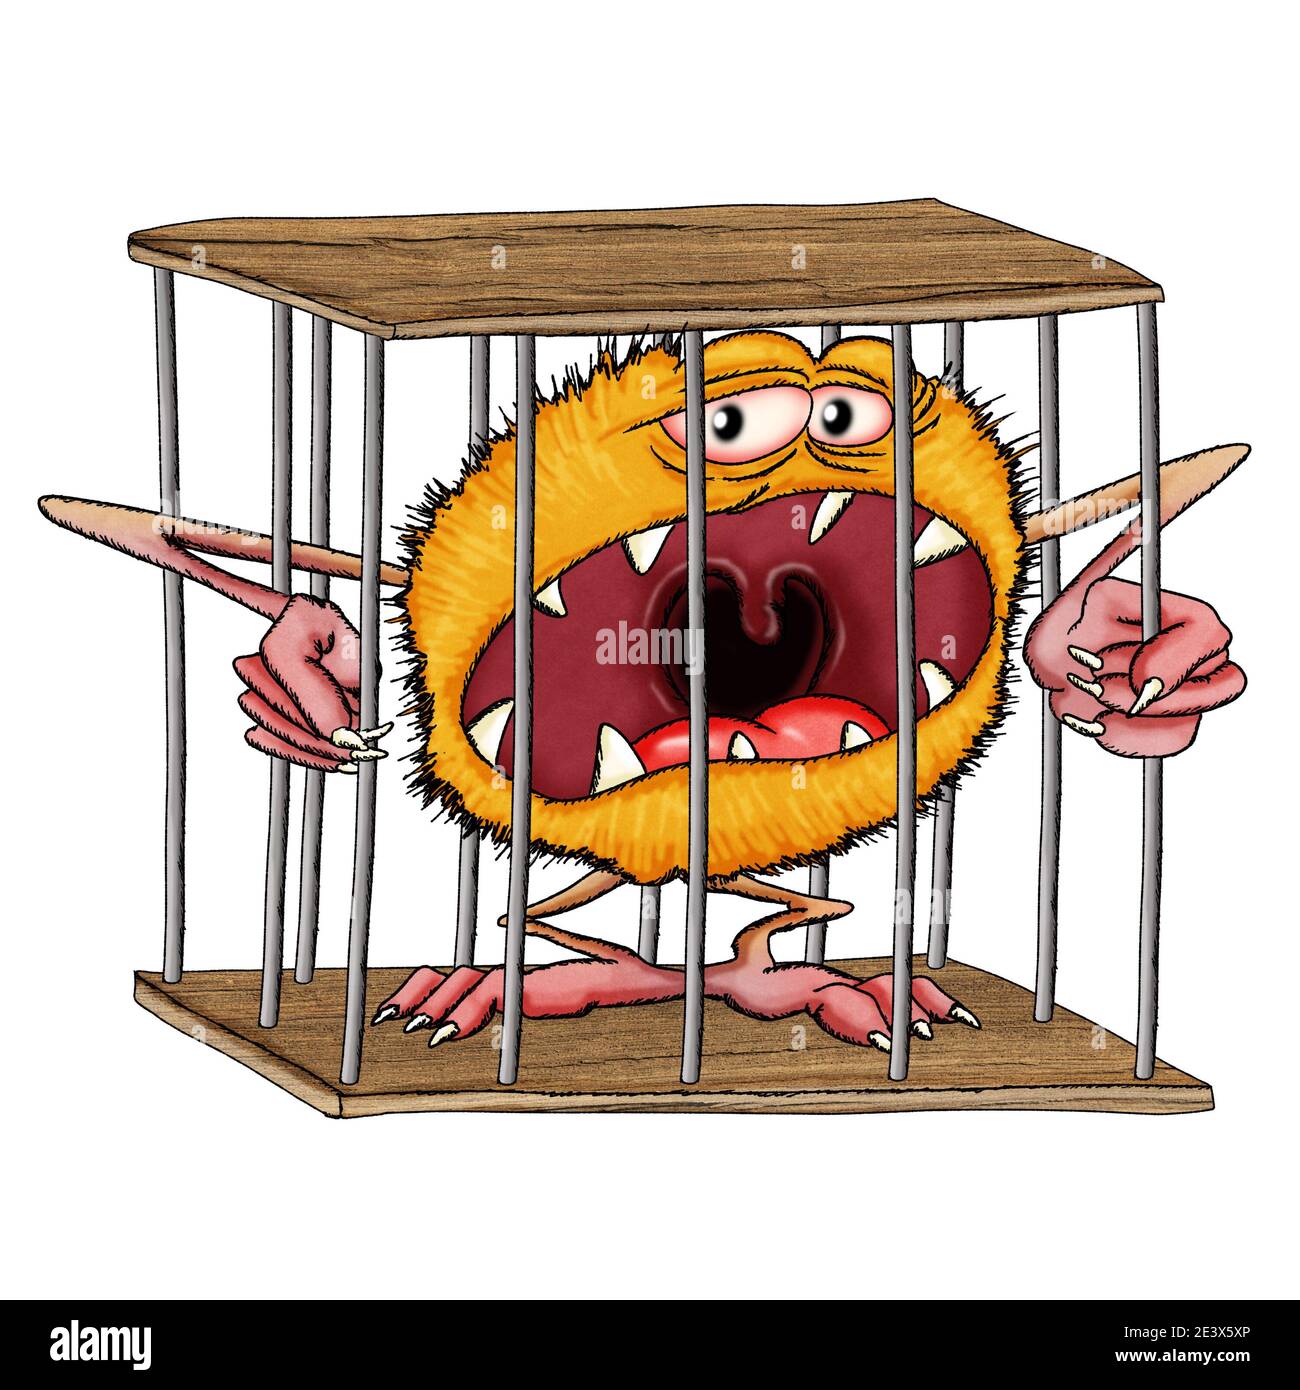 The Toothy Monster is trapped in a cage. Illustration on white background. Stock Photo